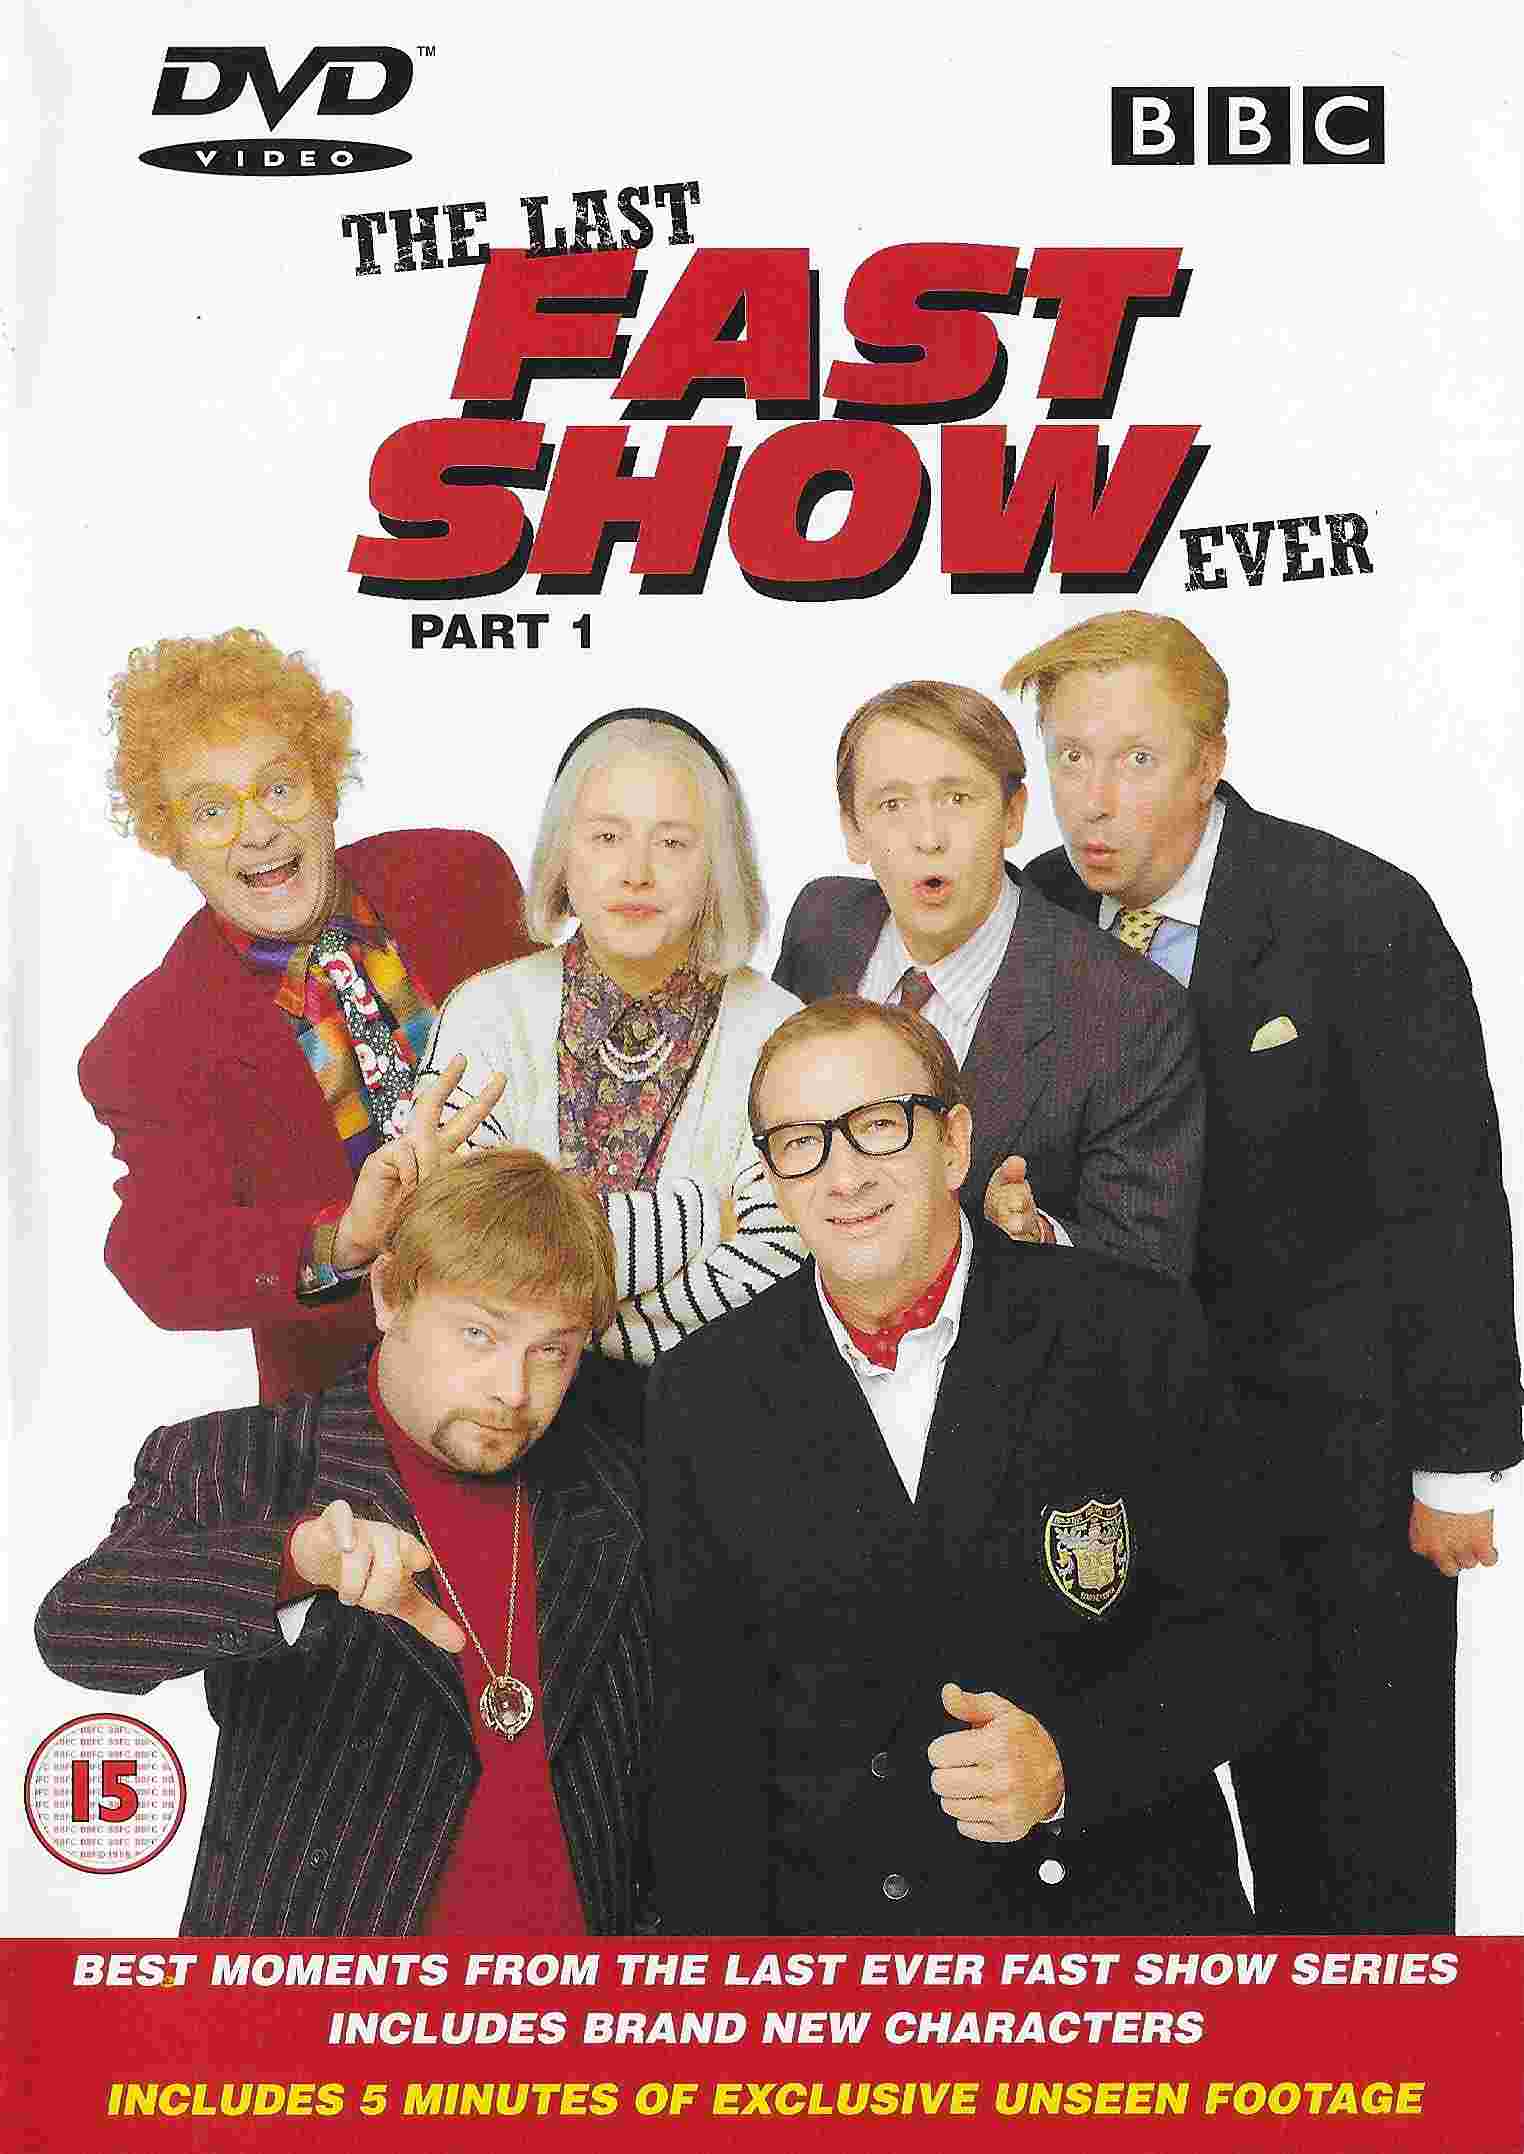 Picture of BBCDVD 1037 The last fast show ever - Part 1 by artist Paul Whitehouse / Charlie Higson from the BBC dvds - Records and Tapes library